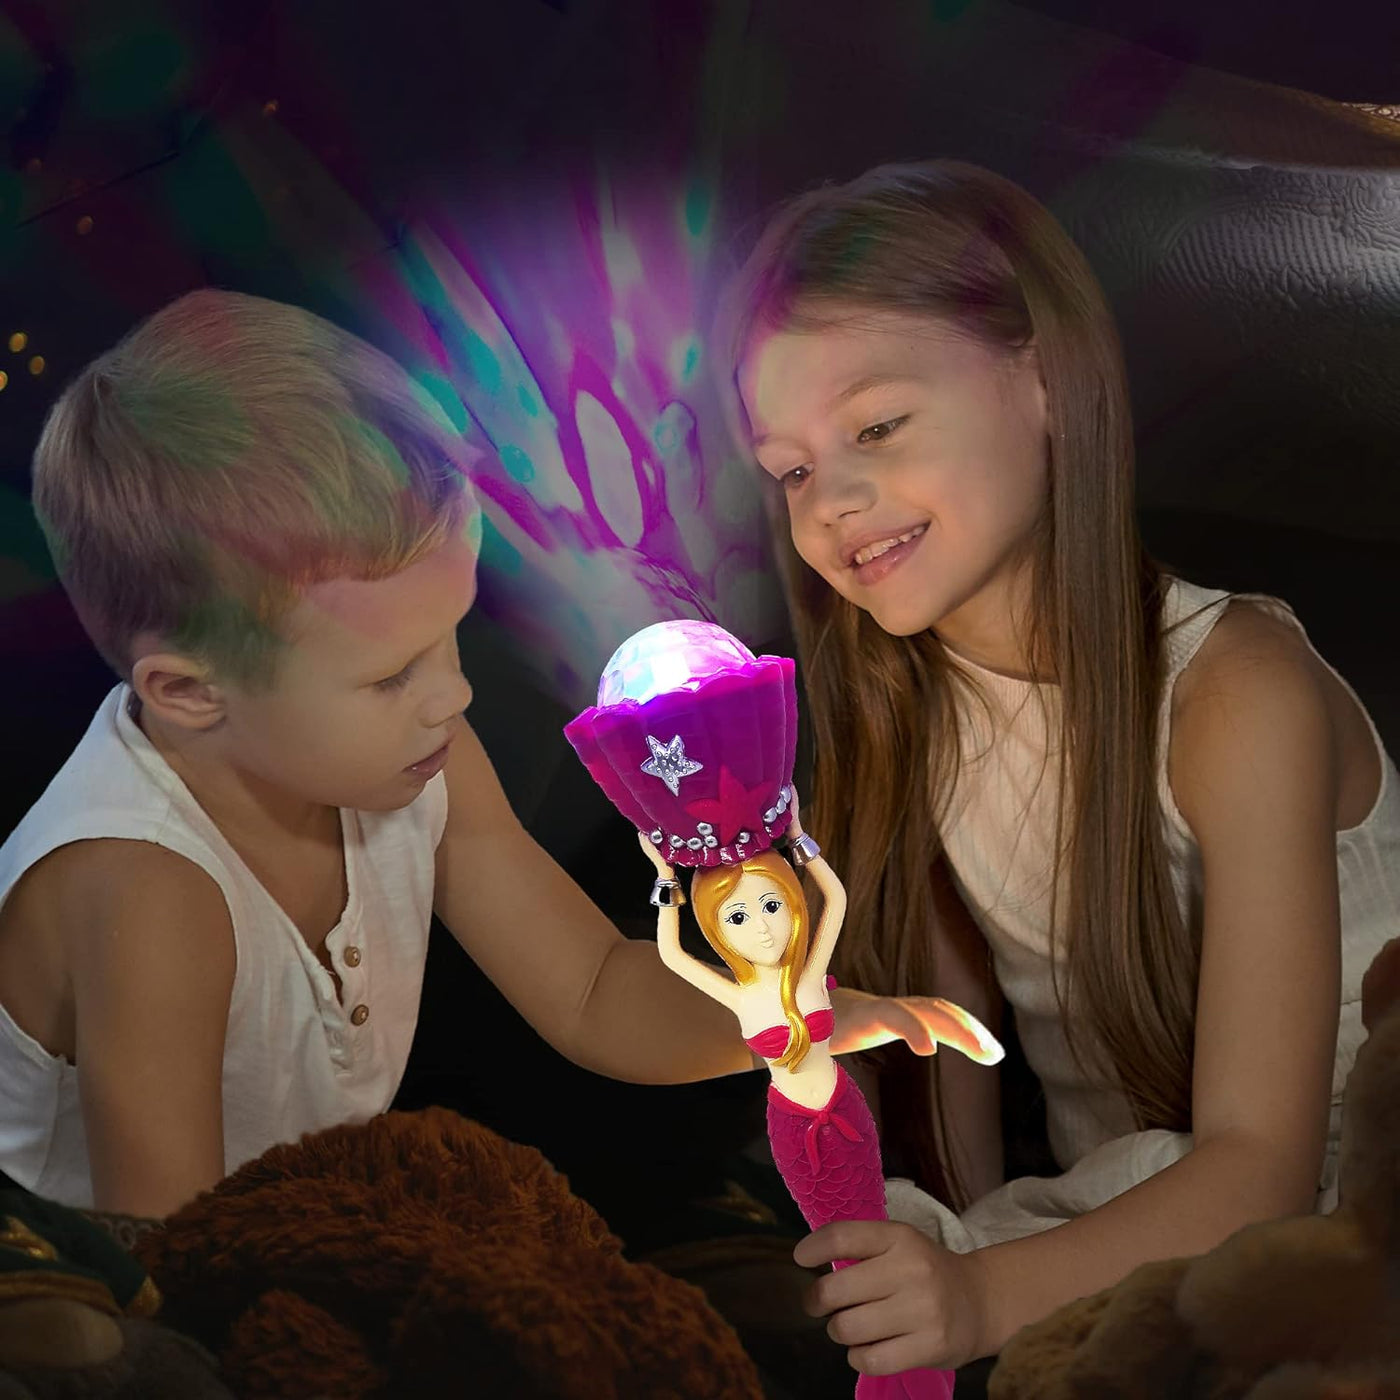 ArtCreativity Light Up Mermaid Wand with Sounds, 11.75 Inch Toy Wand with Spinning LEDs and Sound Effects, Batteries Included, Great Mermaid Gift Idea for Boys and Girls, Fun Birthday Party Favor